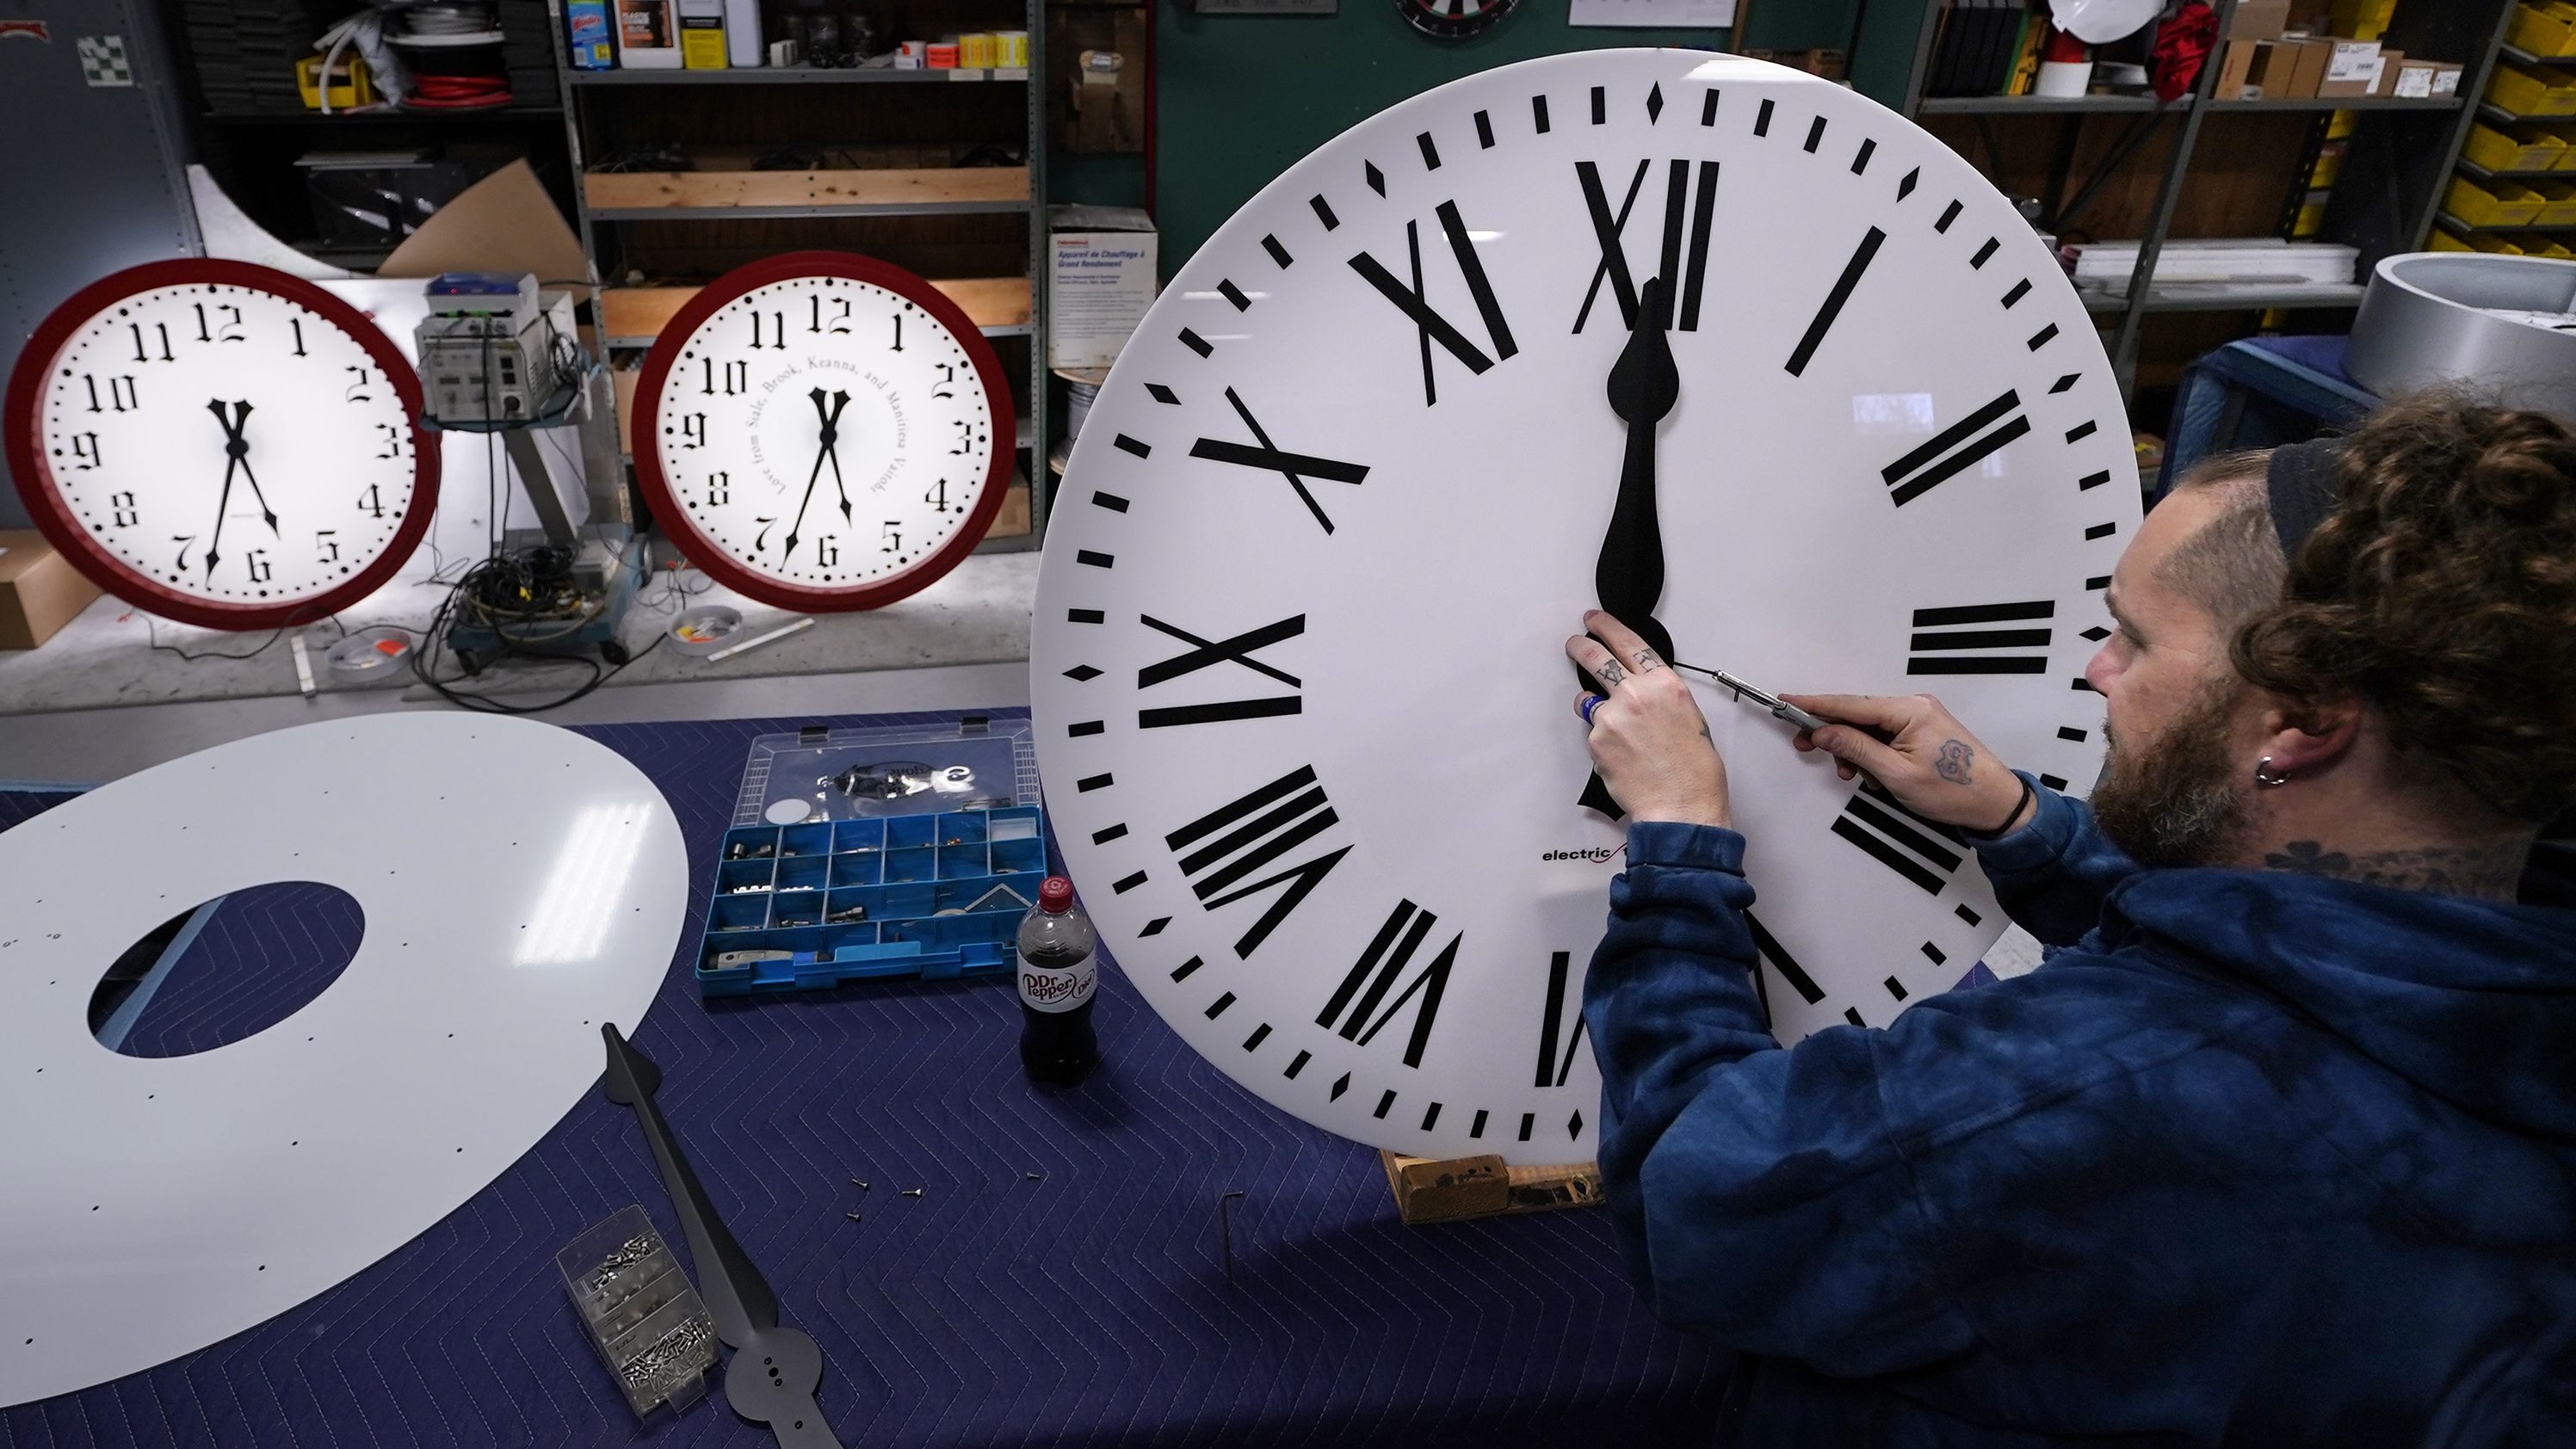 Ian Roders fastens the hands to a clock at the Electric Time Company in Medfield, Massachusetts, on Tuesday, November 1. Daylight saving time ends at 2 a.m. on Sunday, November 6, when clocks in the US are set back one hour.